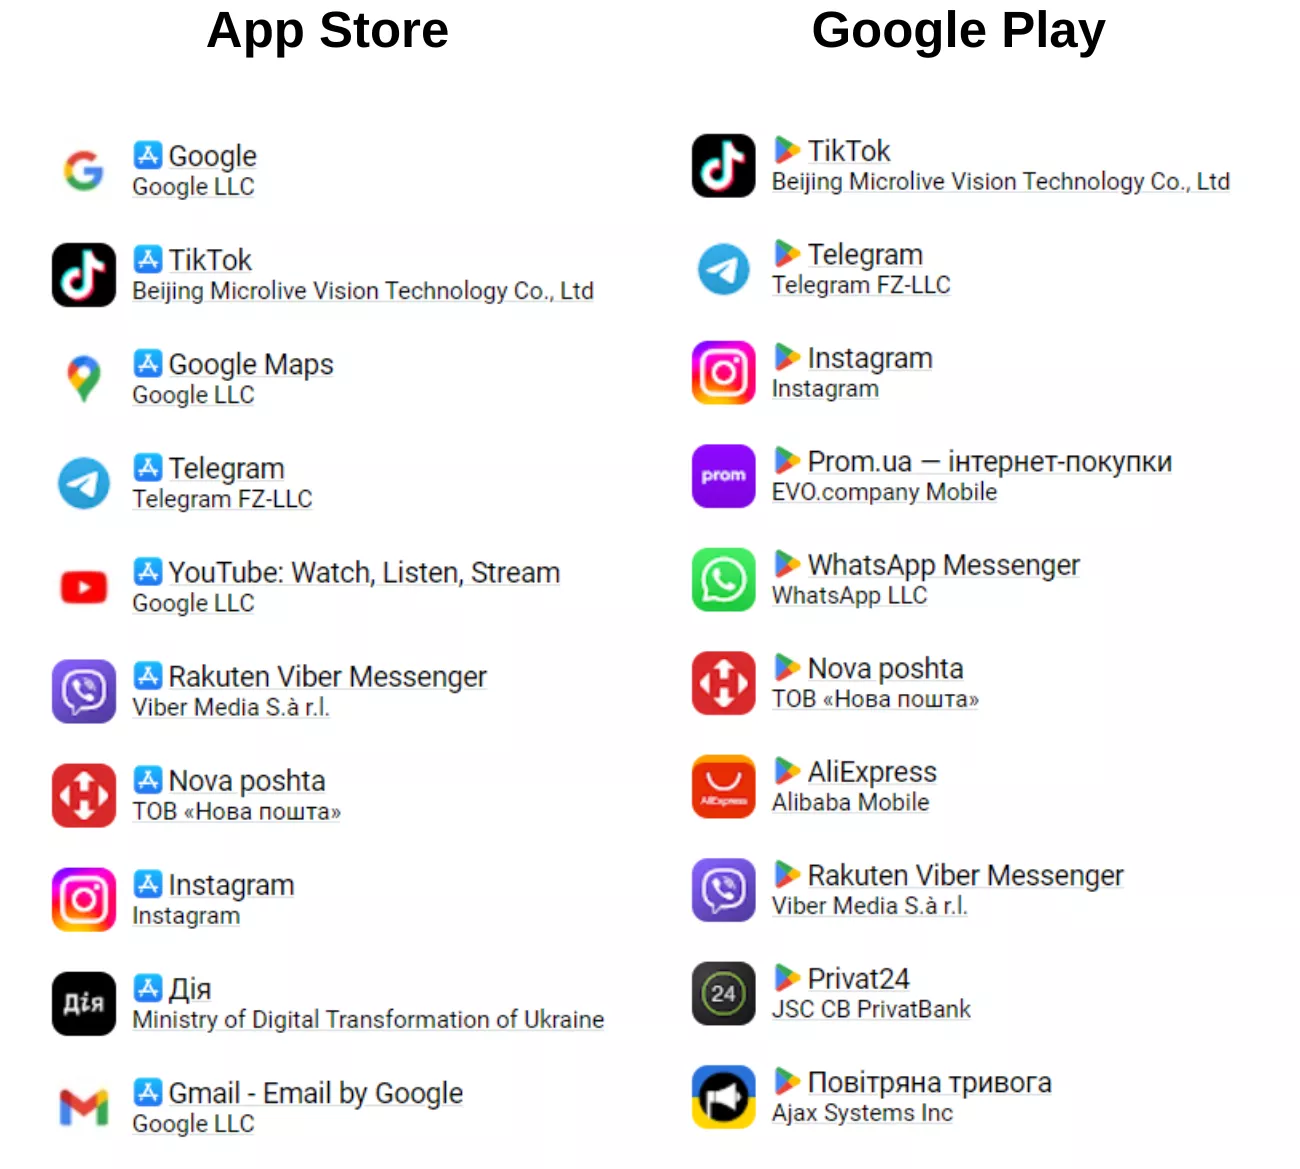 overall App Store and Google Play apps